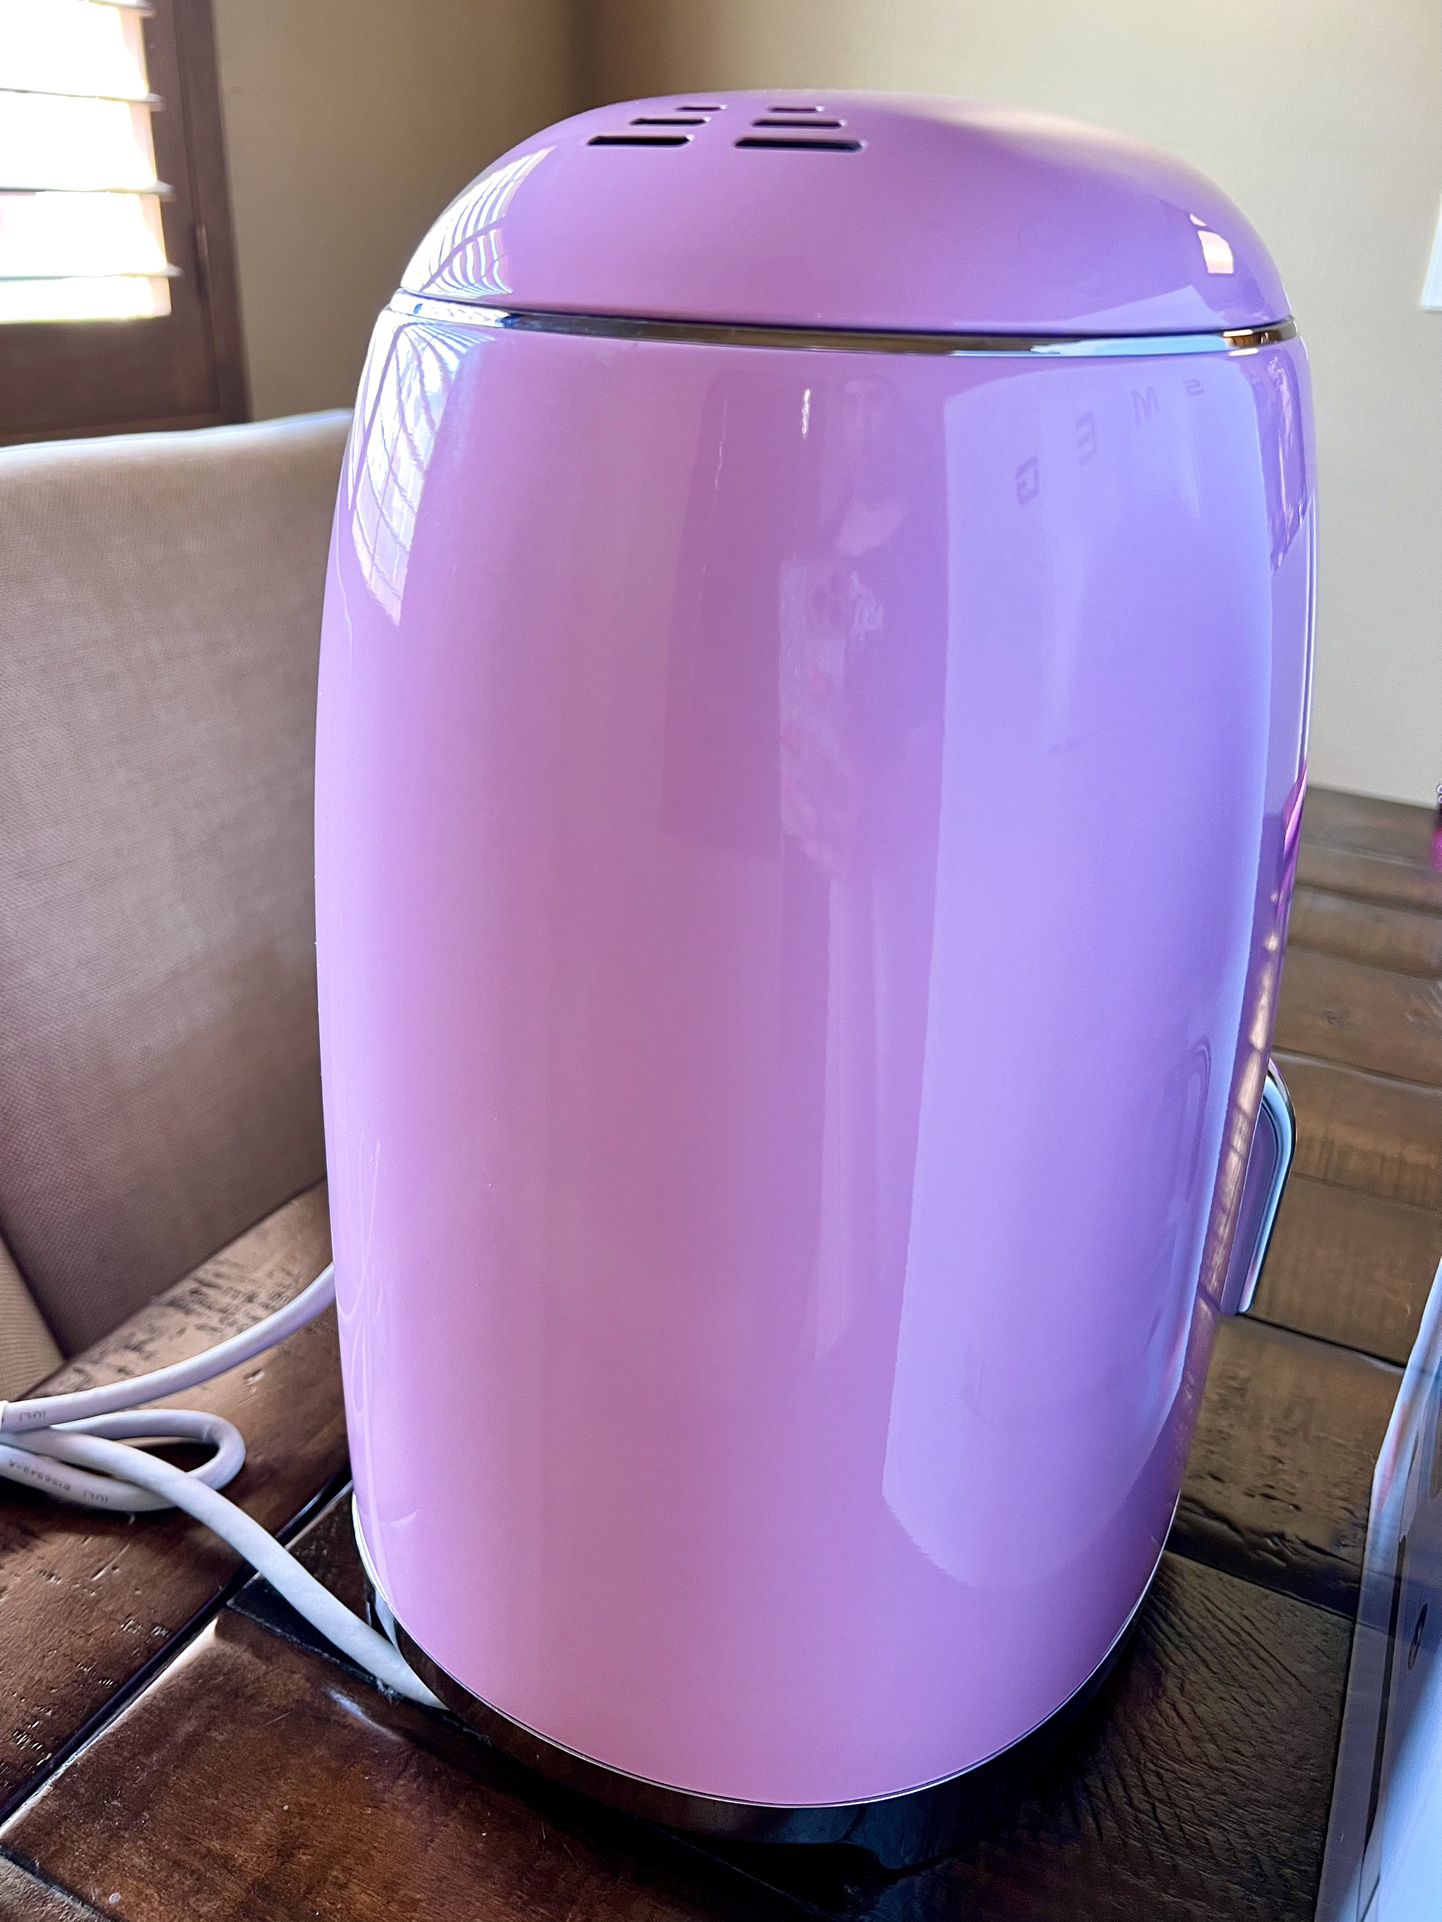 SMEG Drip Filter Coffee Maker Pink 50's Style Aesthetic - Like New for Sale  in Redwood City, CA - OfferUp